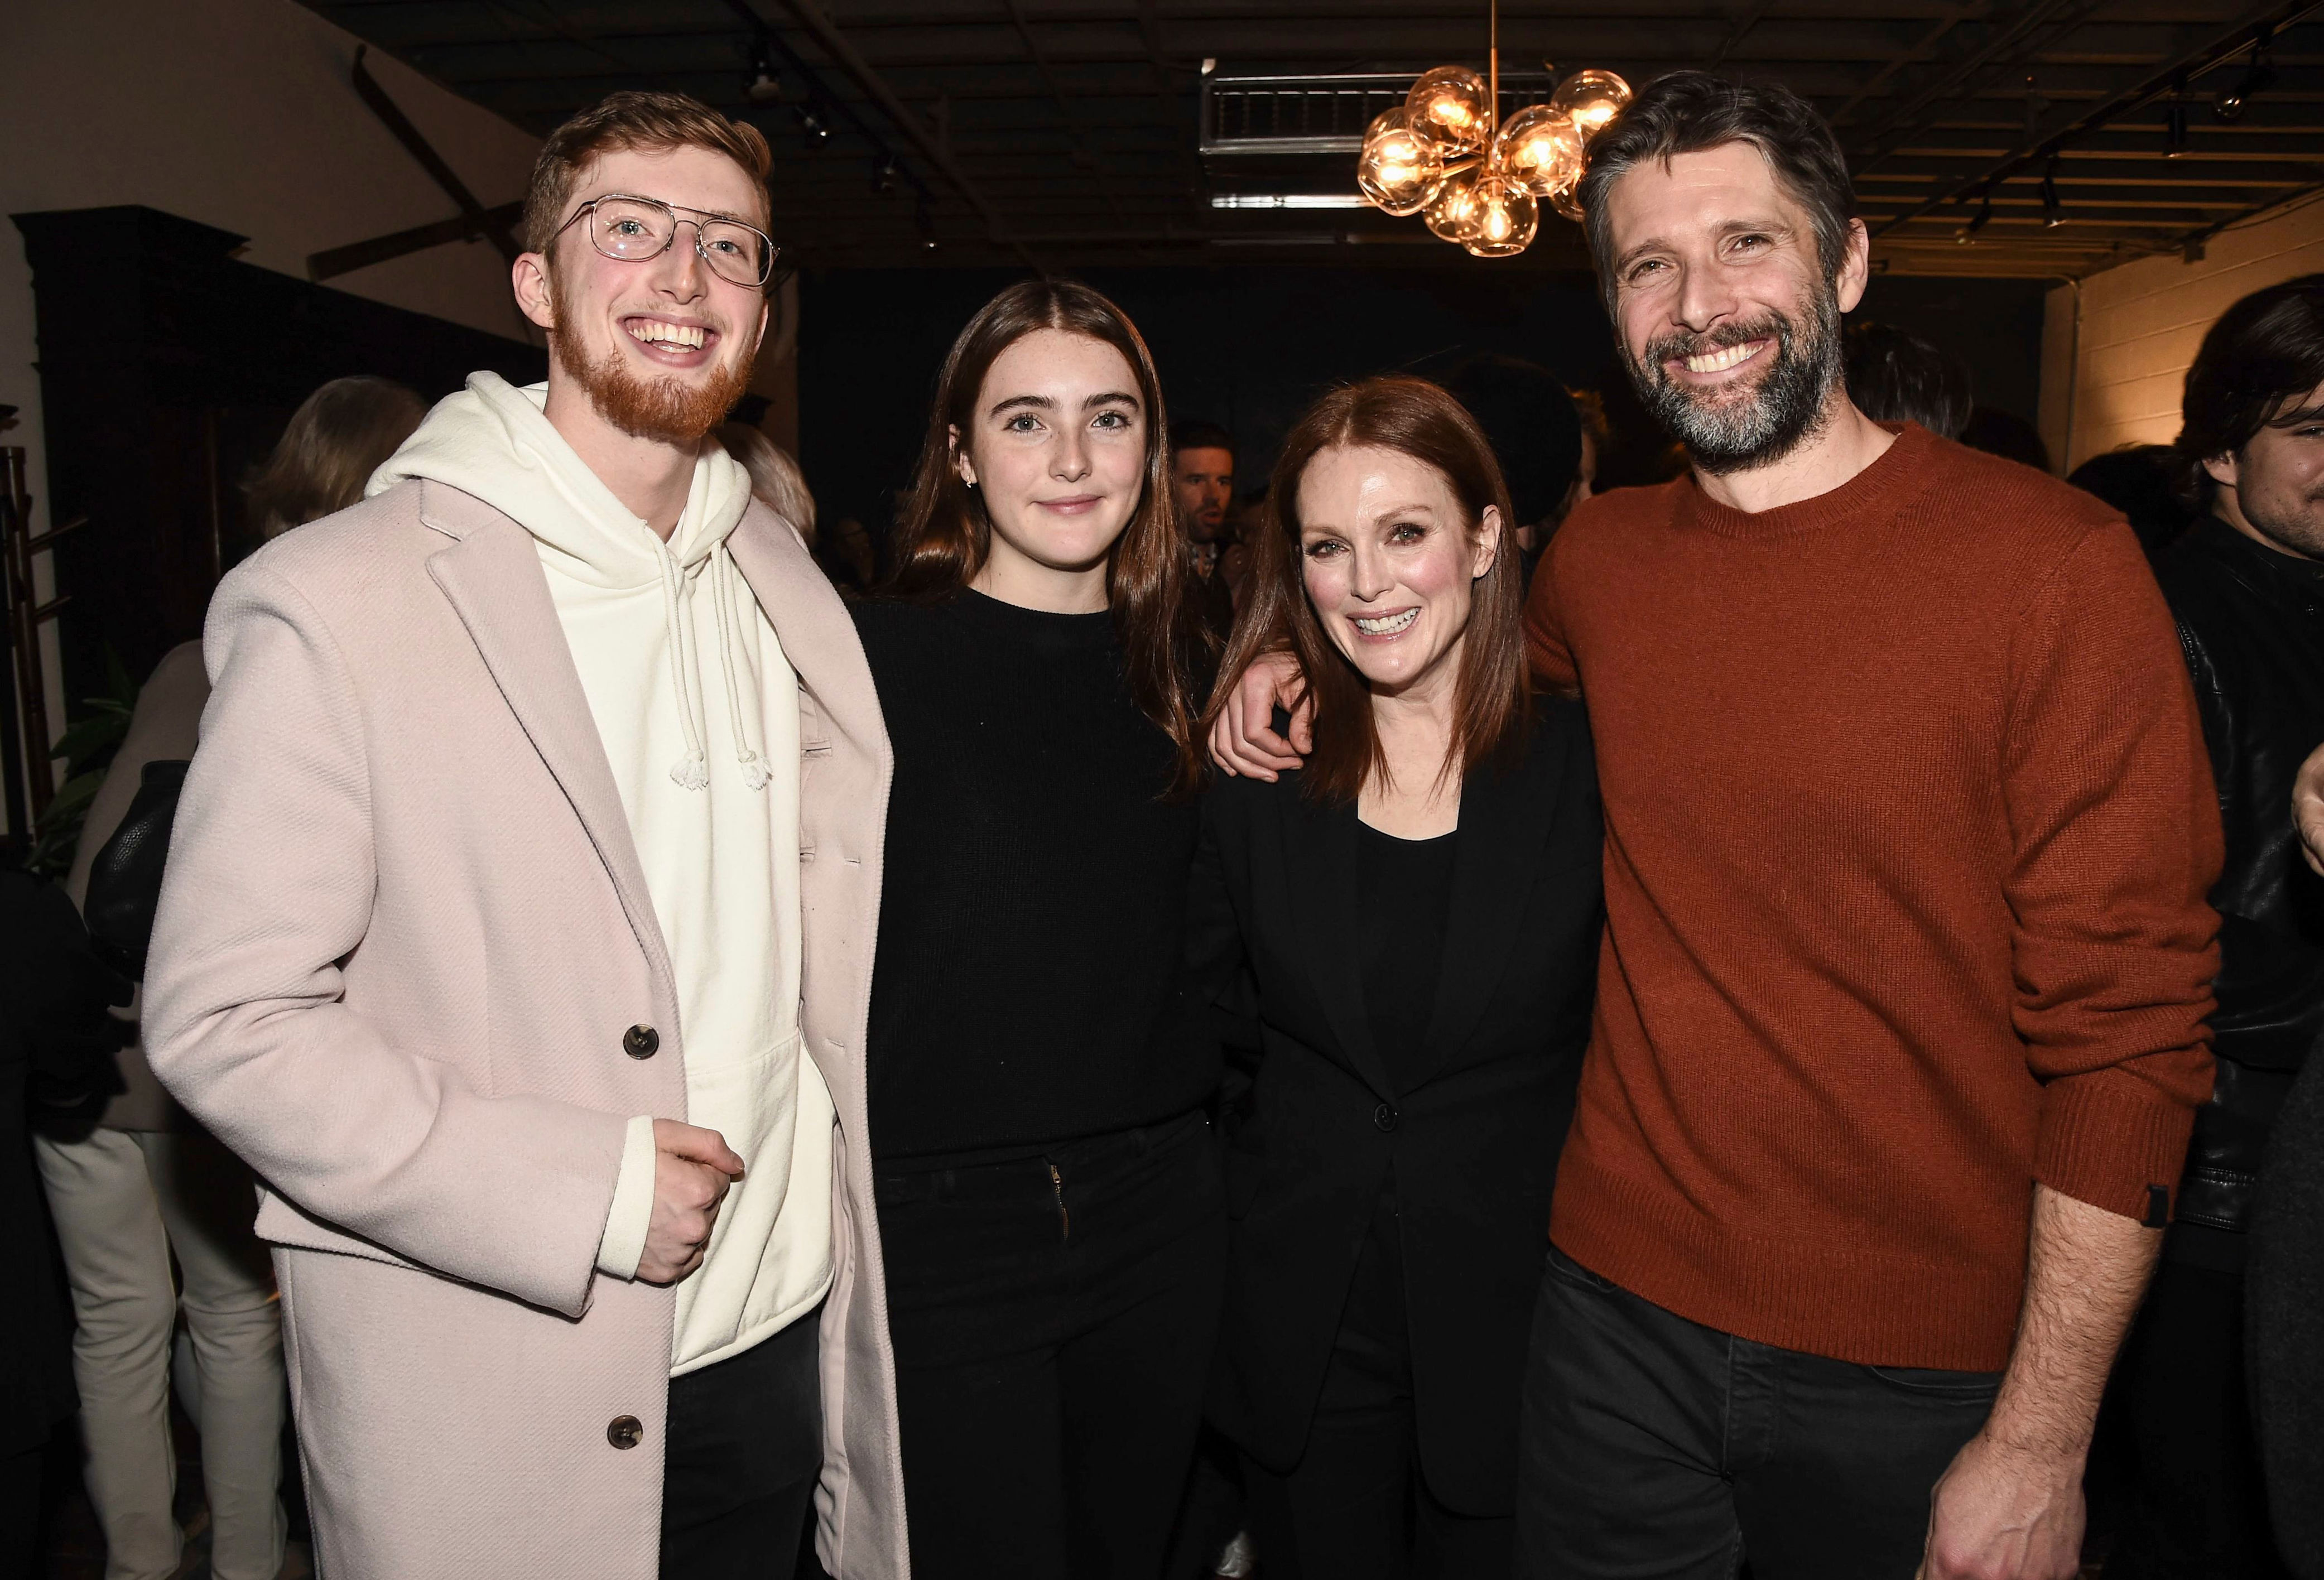 <p><a href="https://www.wonderwall.com/celebrity/profiles/overview/julianne-moore-1047.article">Julianne Moore</a> and director husband Bart Freundlich's kids -- son Caleb (who was born in 1997) and daughter Liv (who was born in 2002) -- joined Mom and Dad at the "After the Wedding" cast dinner hosted by Chase Sapphire on Main during the <a href="https://www.wonderwall.com/awards-events/sundance-film-festival-2019-celebrities-park-city-3018163.gallery">Sundance Film Festival</a> in Park City, Utah, on Jan. 24, 2019.</p>